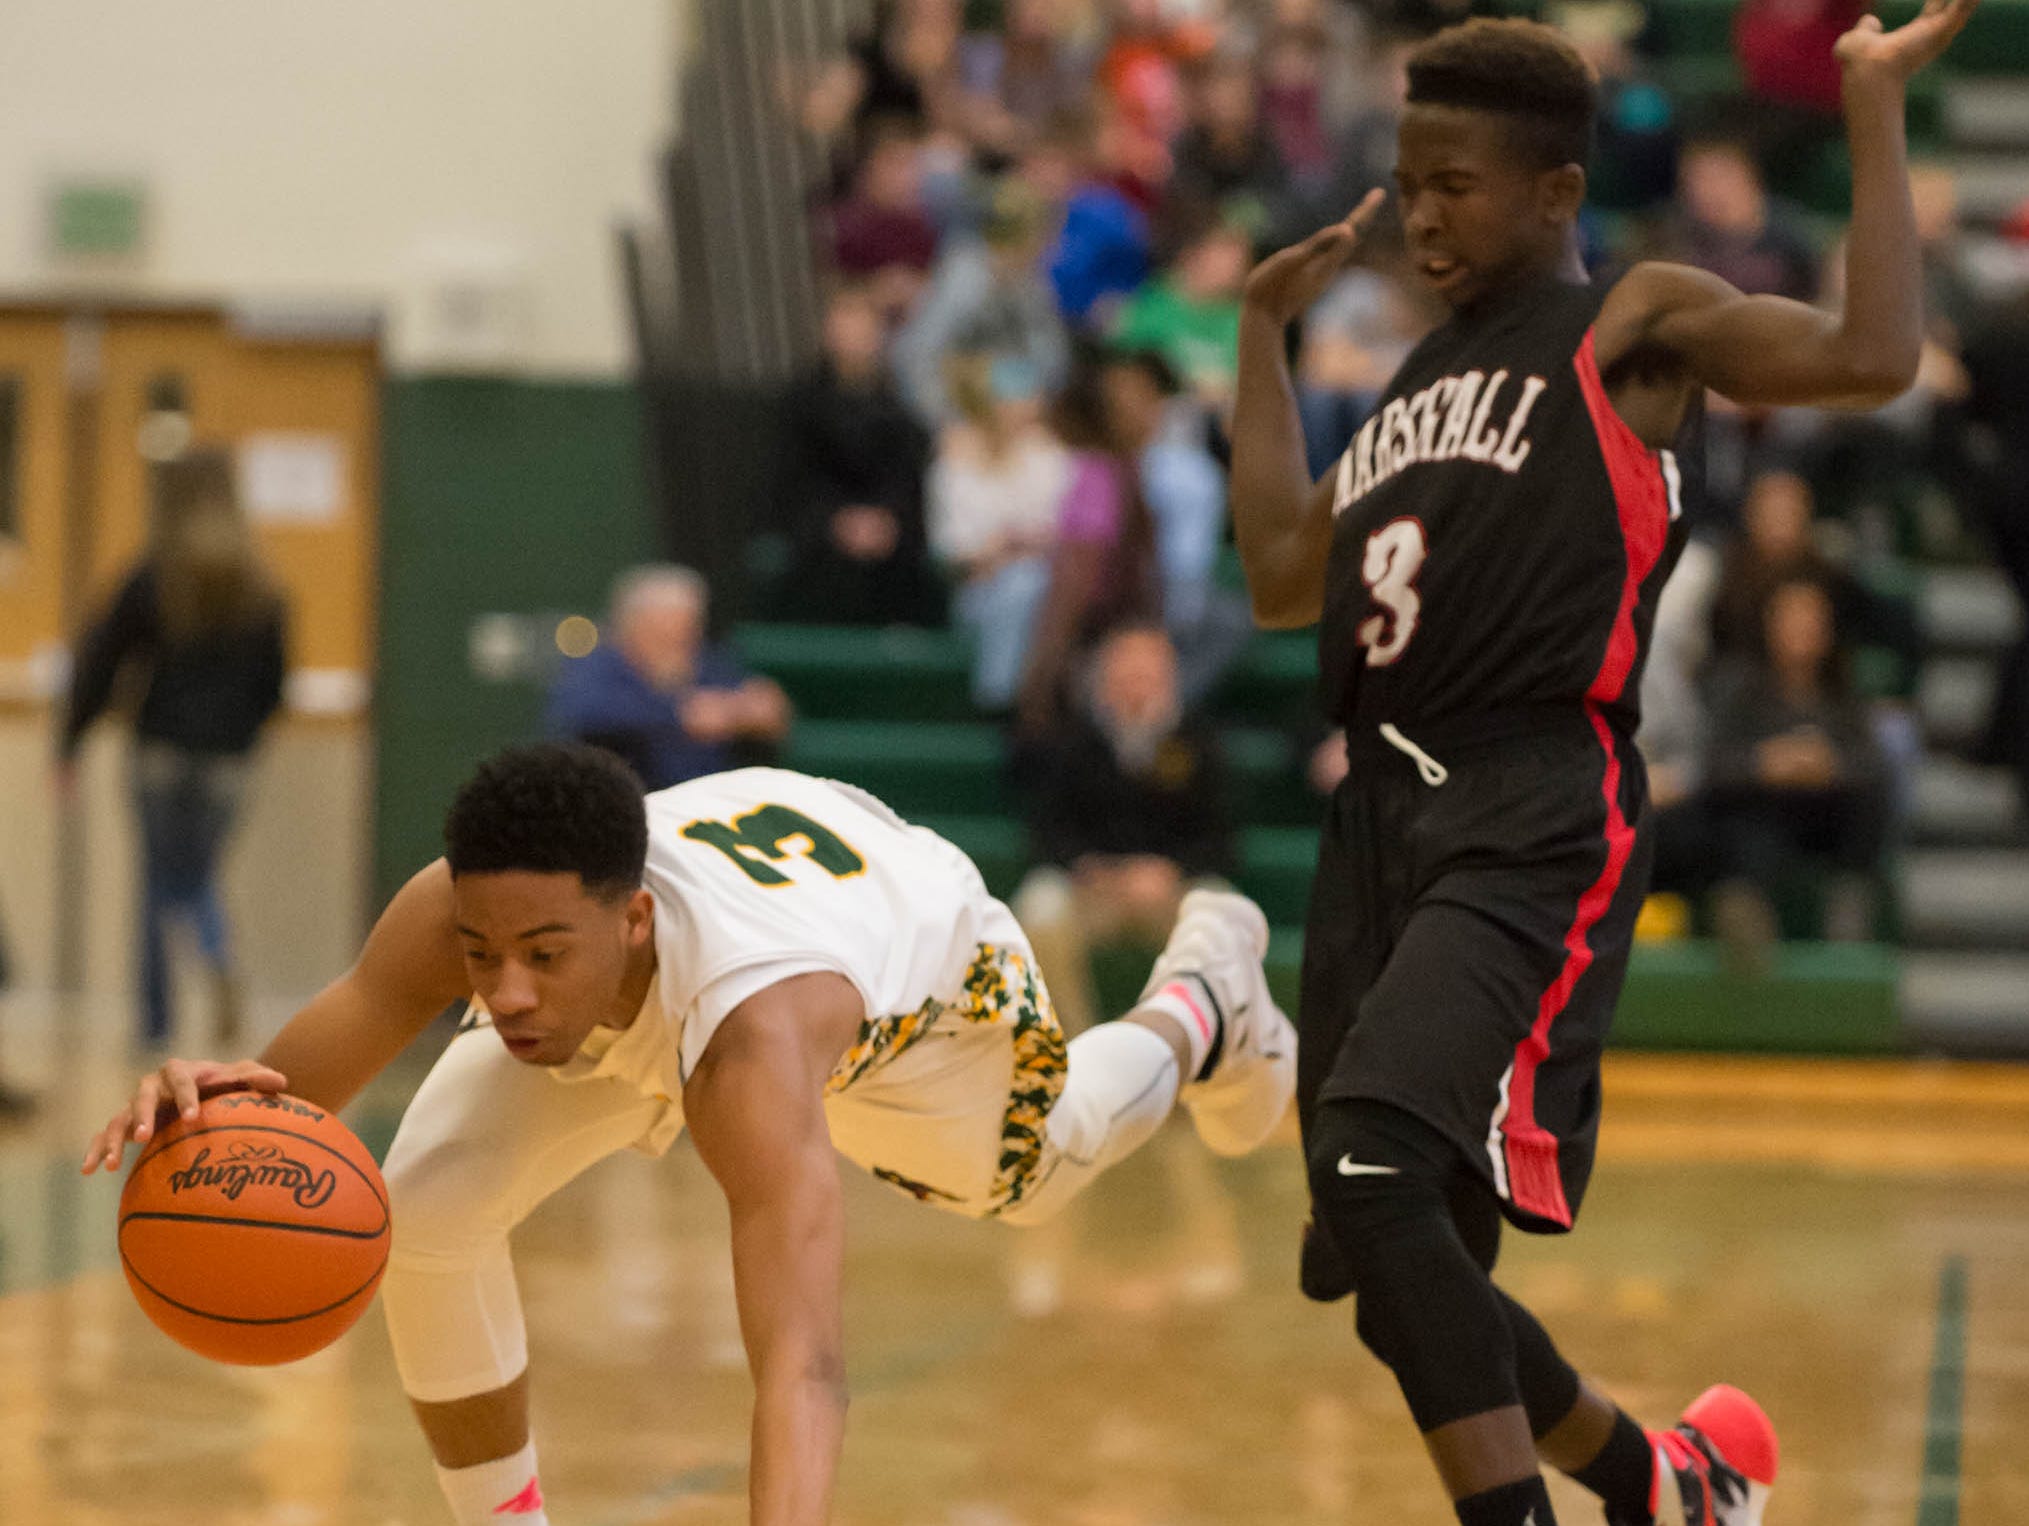 Pennfield's Ronald Jamierson (3) gets triped by Marshall's Marcus Walters (3) during Friday night's game.